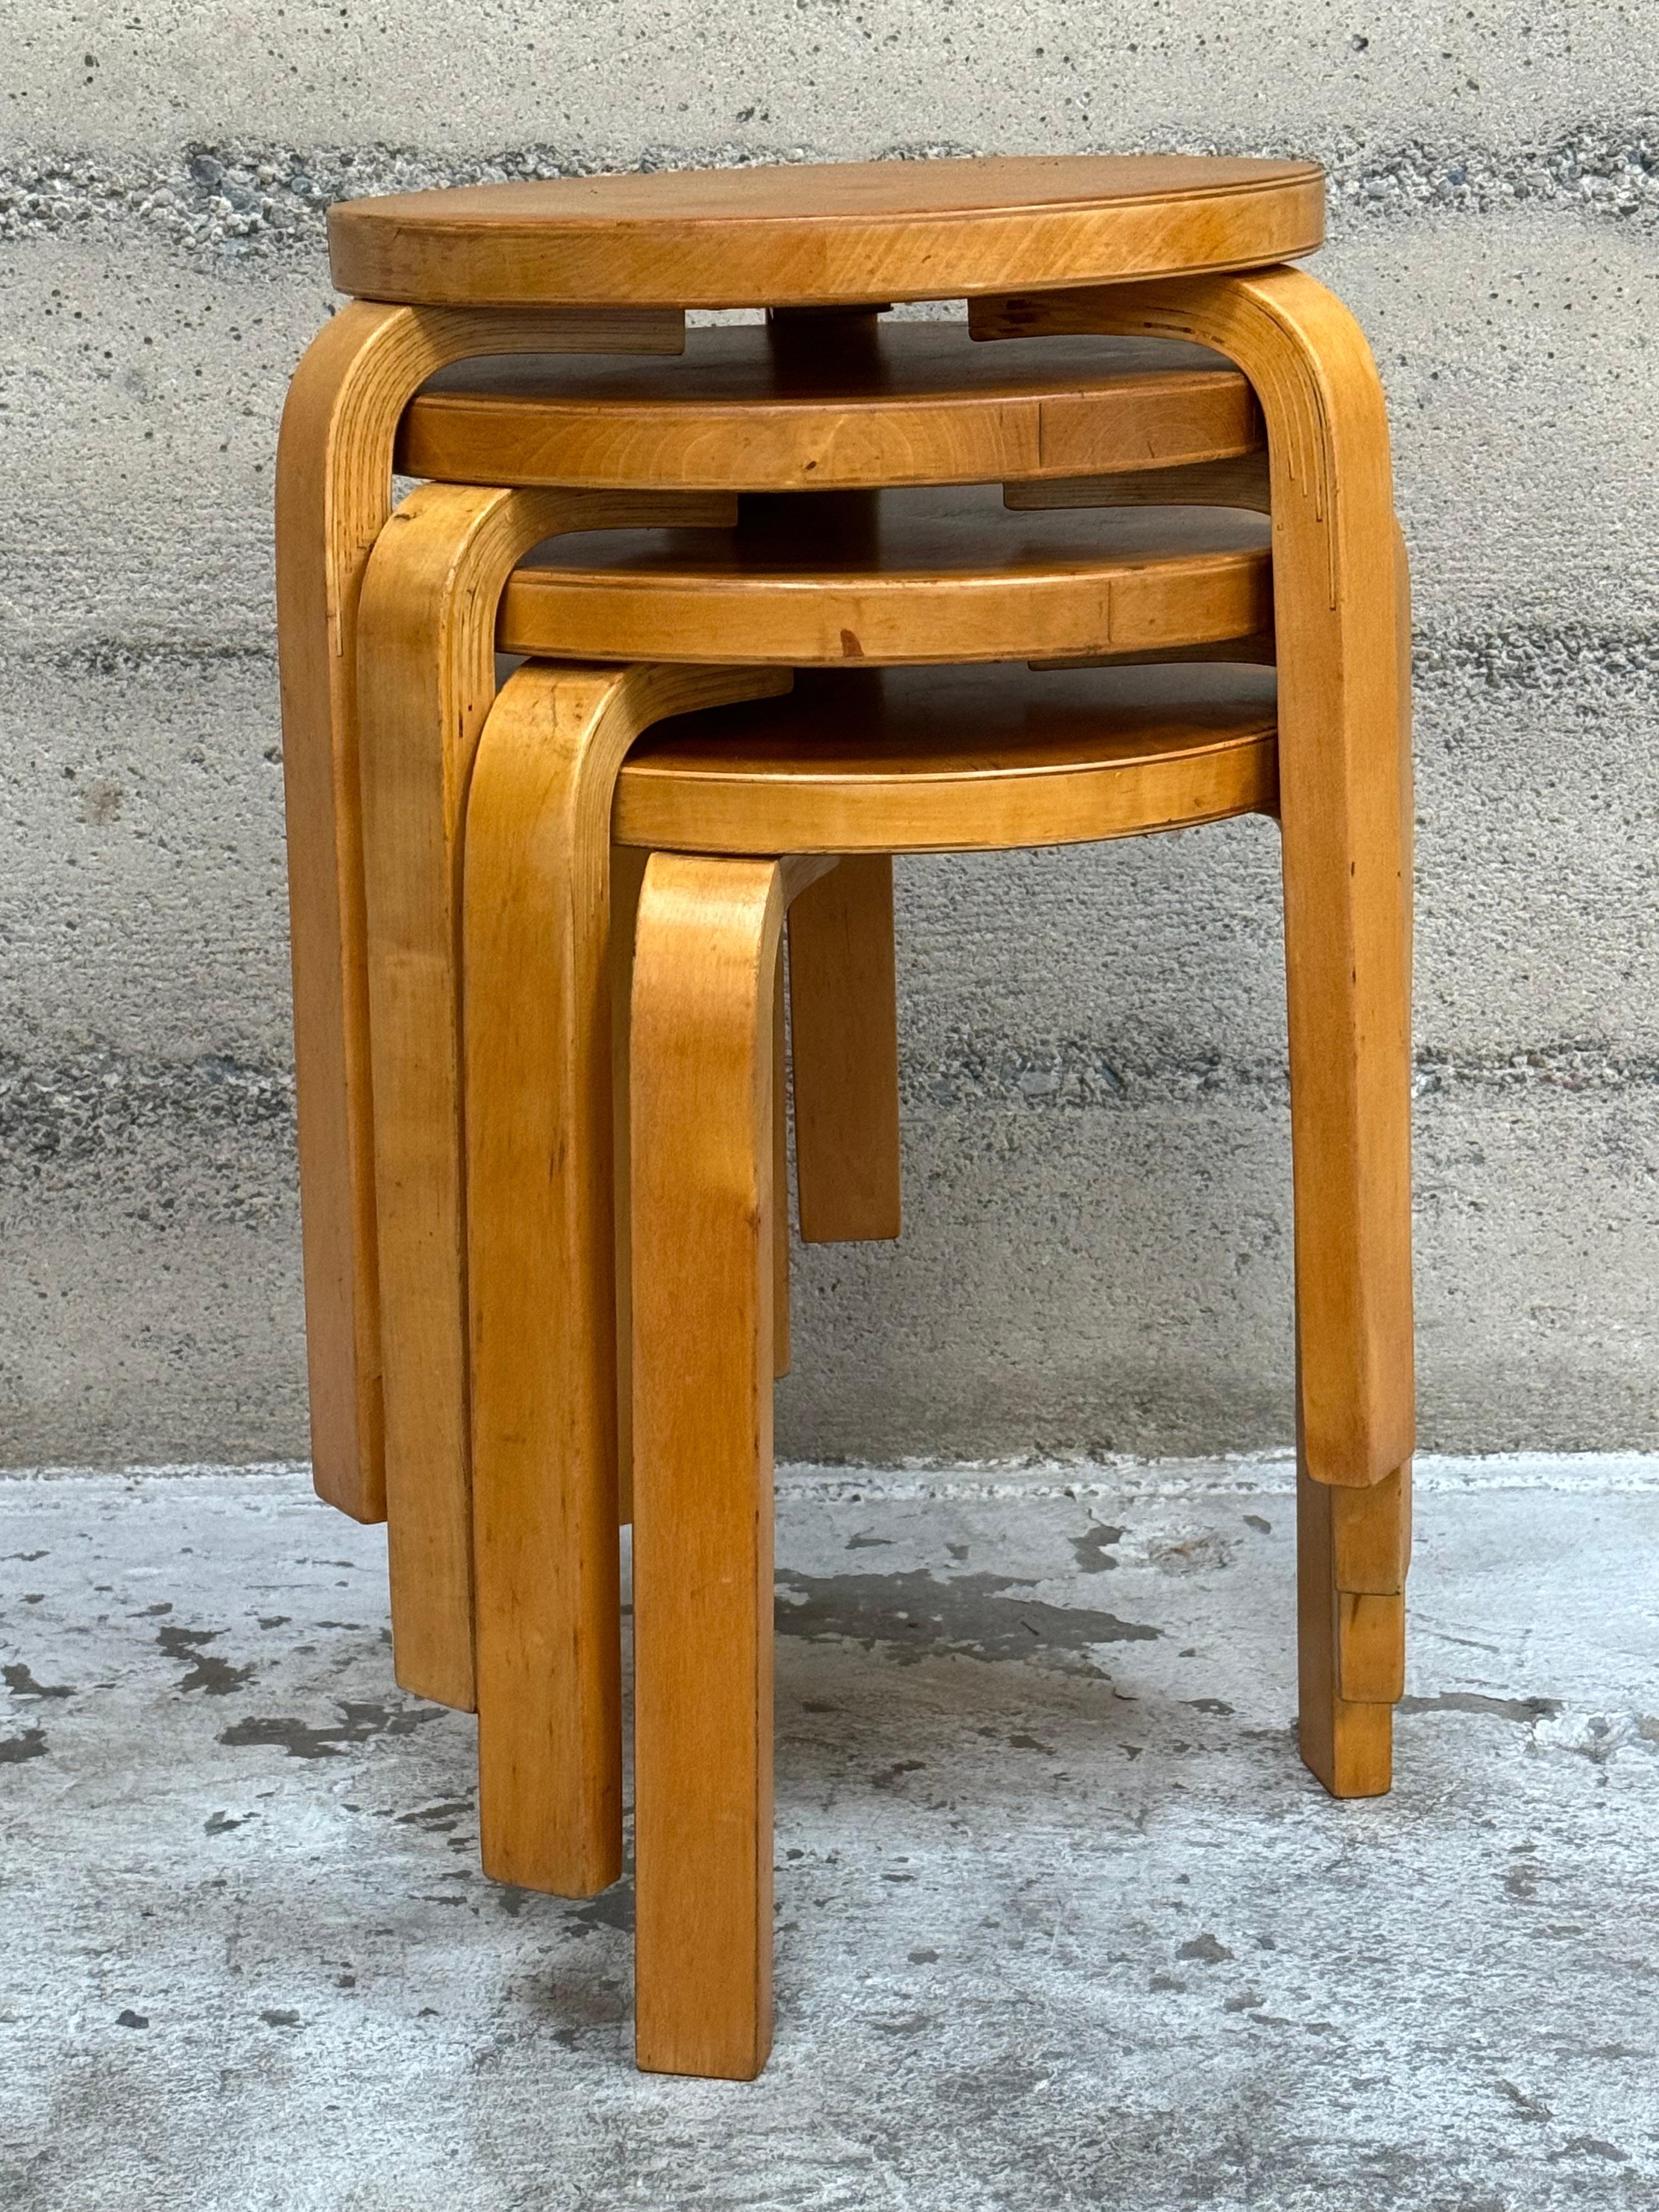 Set of four Alvar Aalto stool model 60, crafted out birch with lamented and steam bent legs. Nice patina with a golden color to the wood and lacquer, each marked on the bottom. A nice set of all original condition stools with a total height of 24